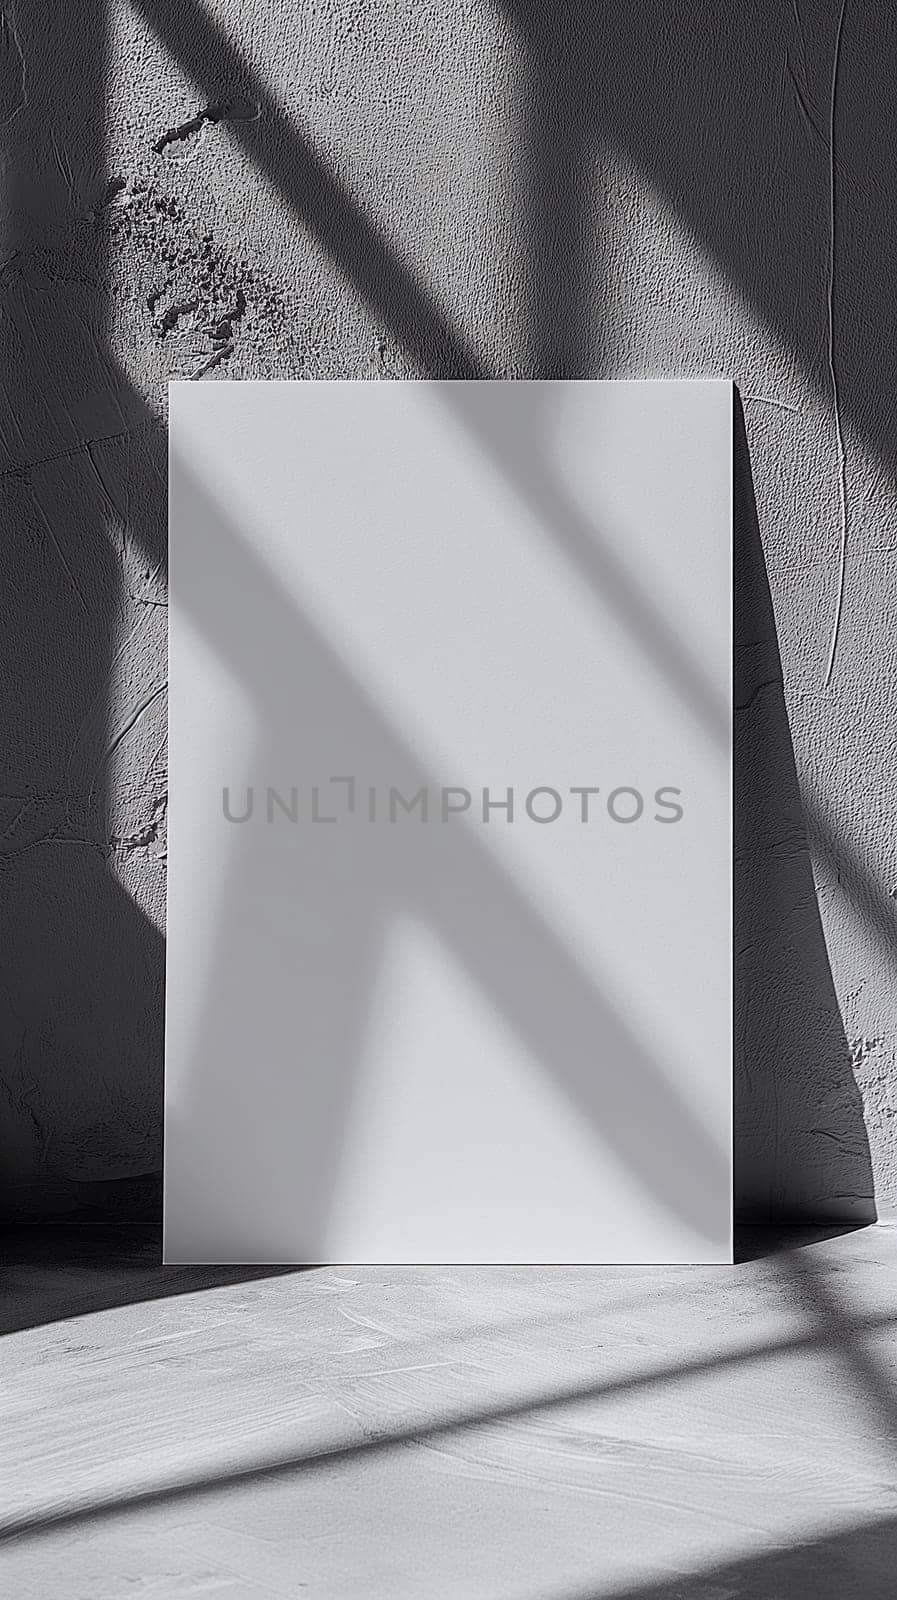 A blank white canvas positioned against a textured wall with contrasting light and shadows creating an artistic composition - marketing and advertising mockup